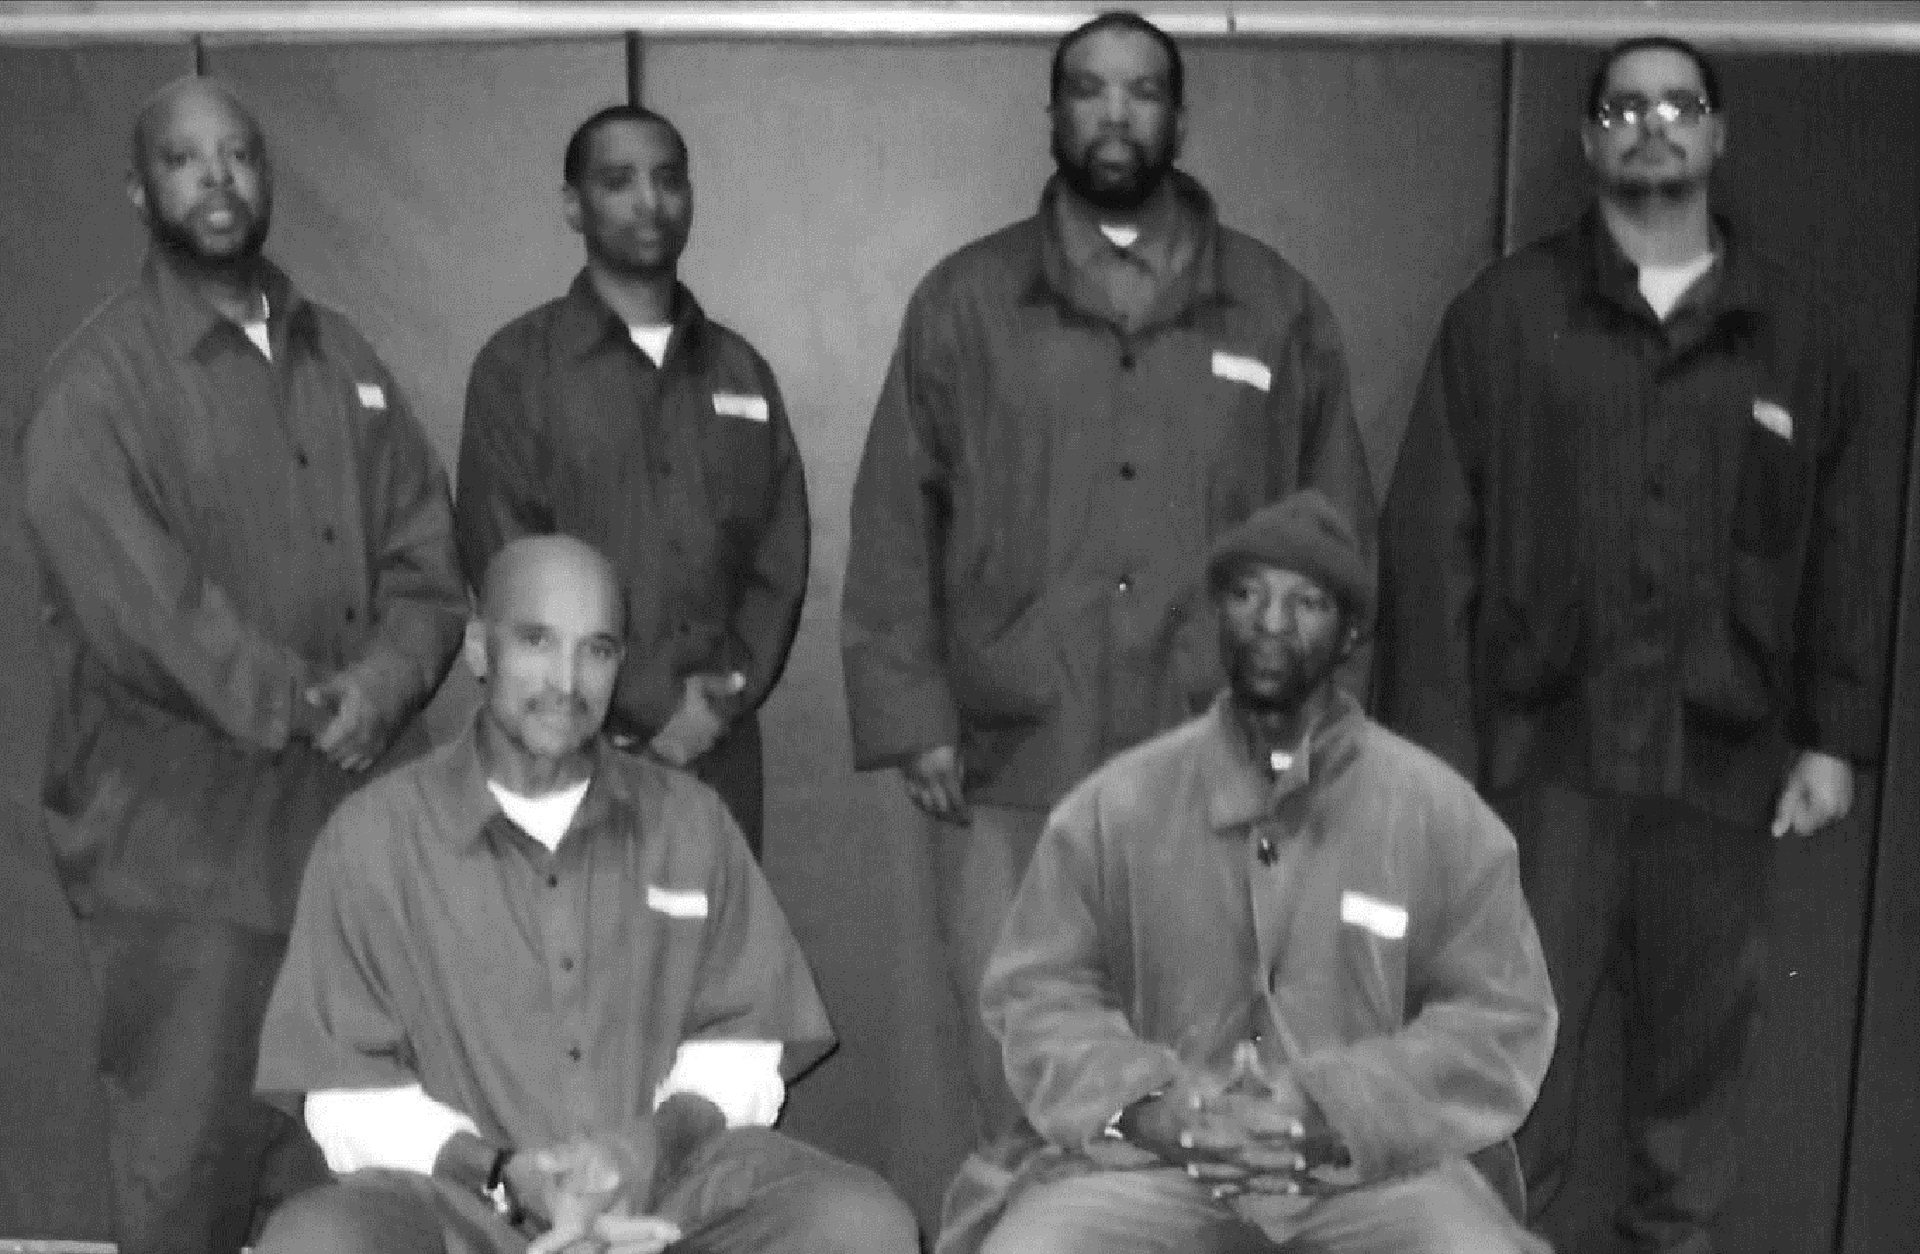 The authors of the "Life Sentences" book include, from left to right, James “Fly” Martin, Robert “Faruq” Wideman, Clarence “Shawn” Robinson, Ralph “Malakki” Bolden, Richard “Khalifa” Diggs, and Oscar Brown. Here they are housed at the old state prison in Pittsburgh.